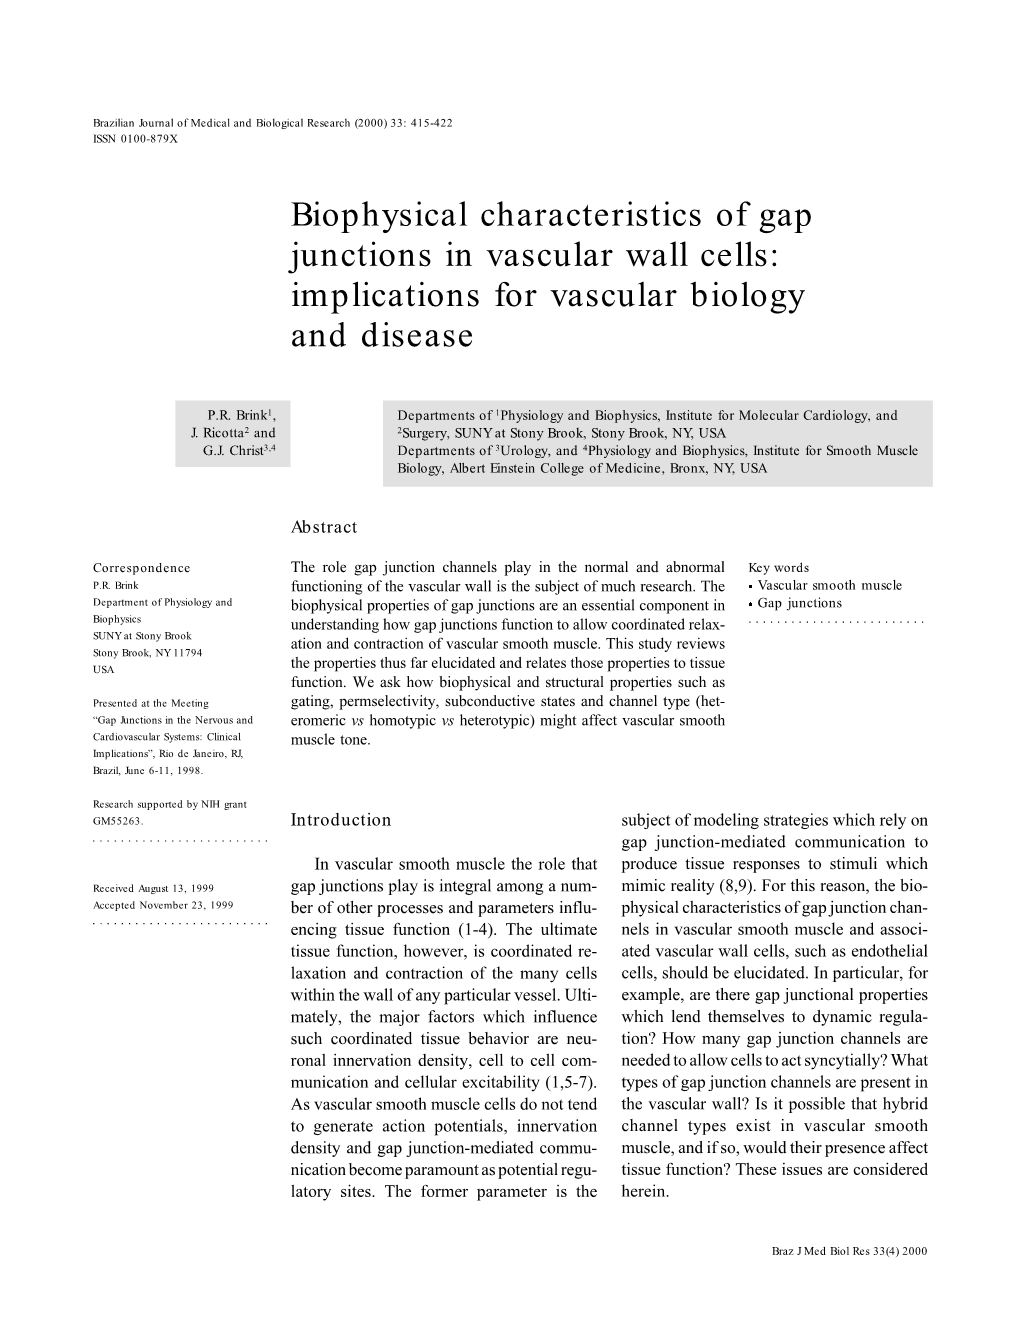 Biophysical Characteristics of Gap Junctions in Vascular Wall Cells: Implications for Vascular Biology and Disease